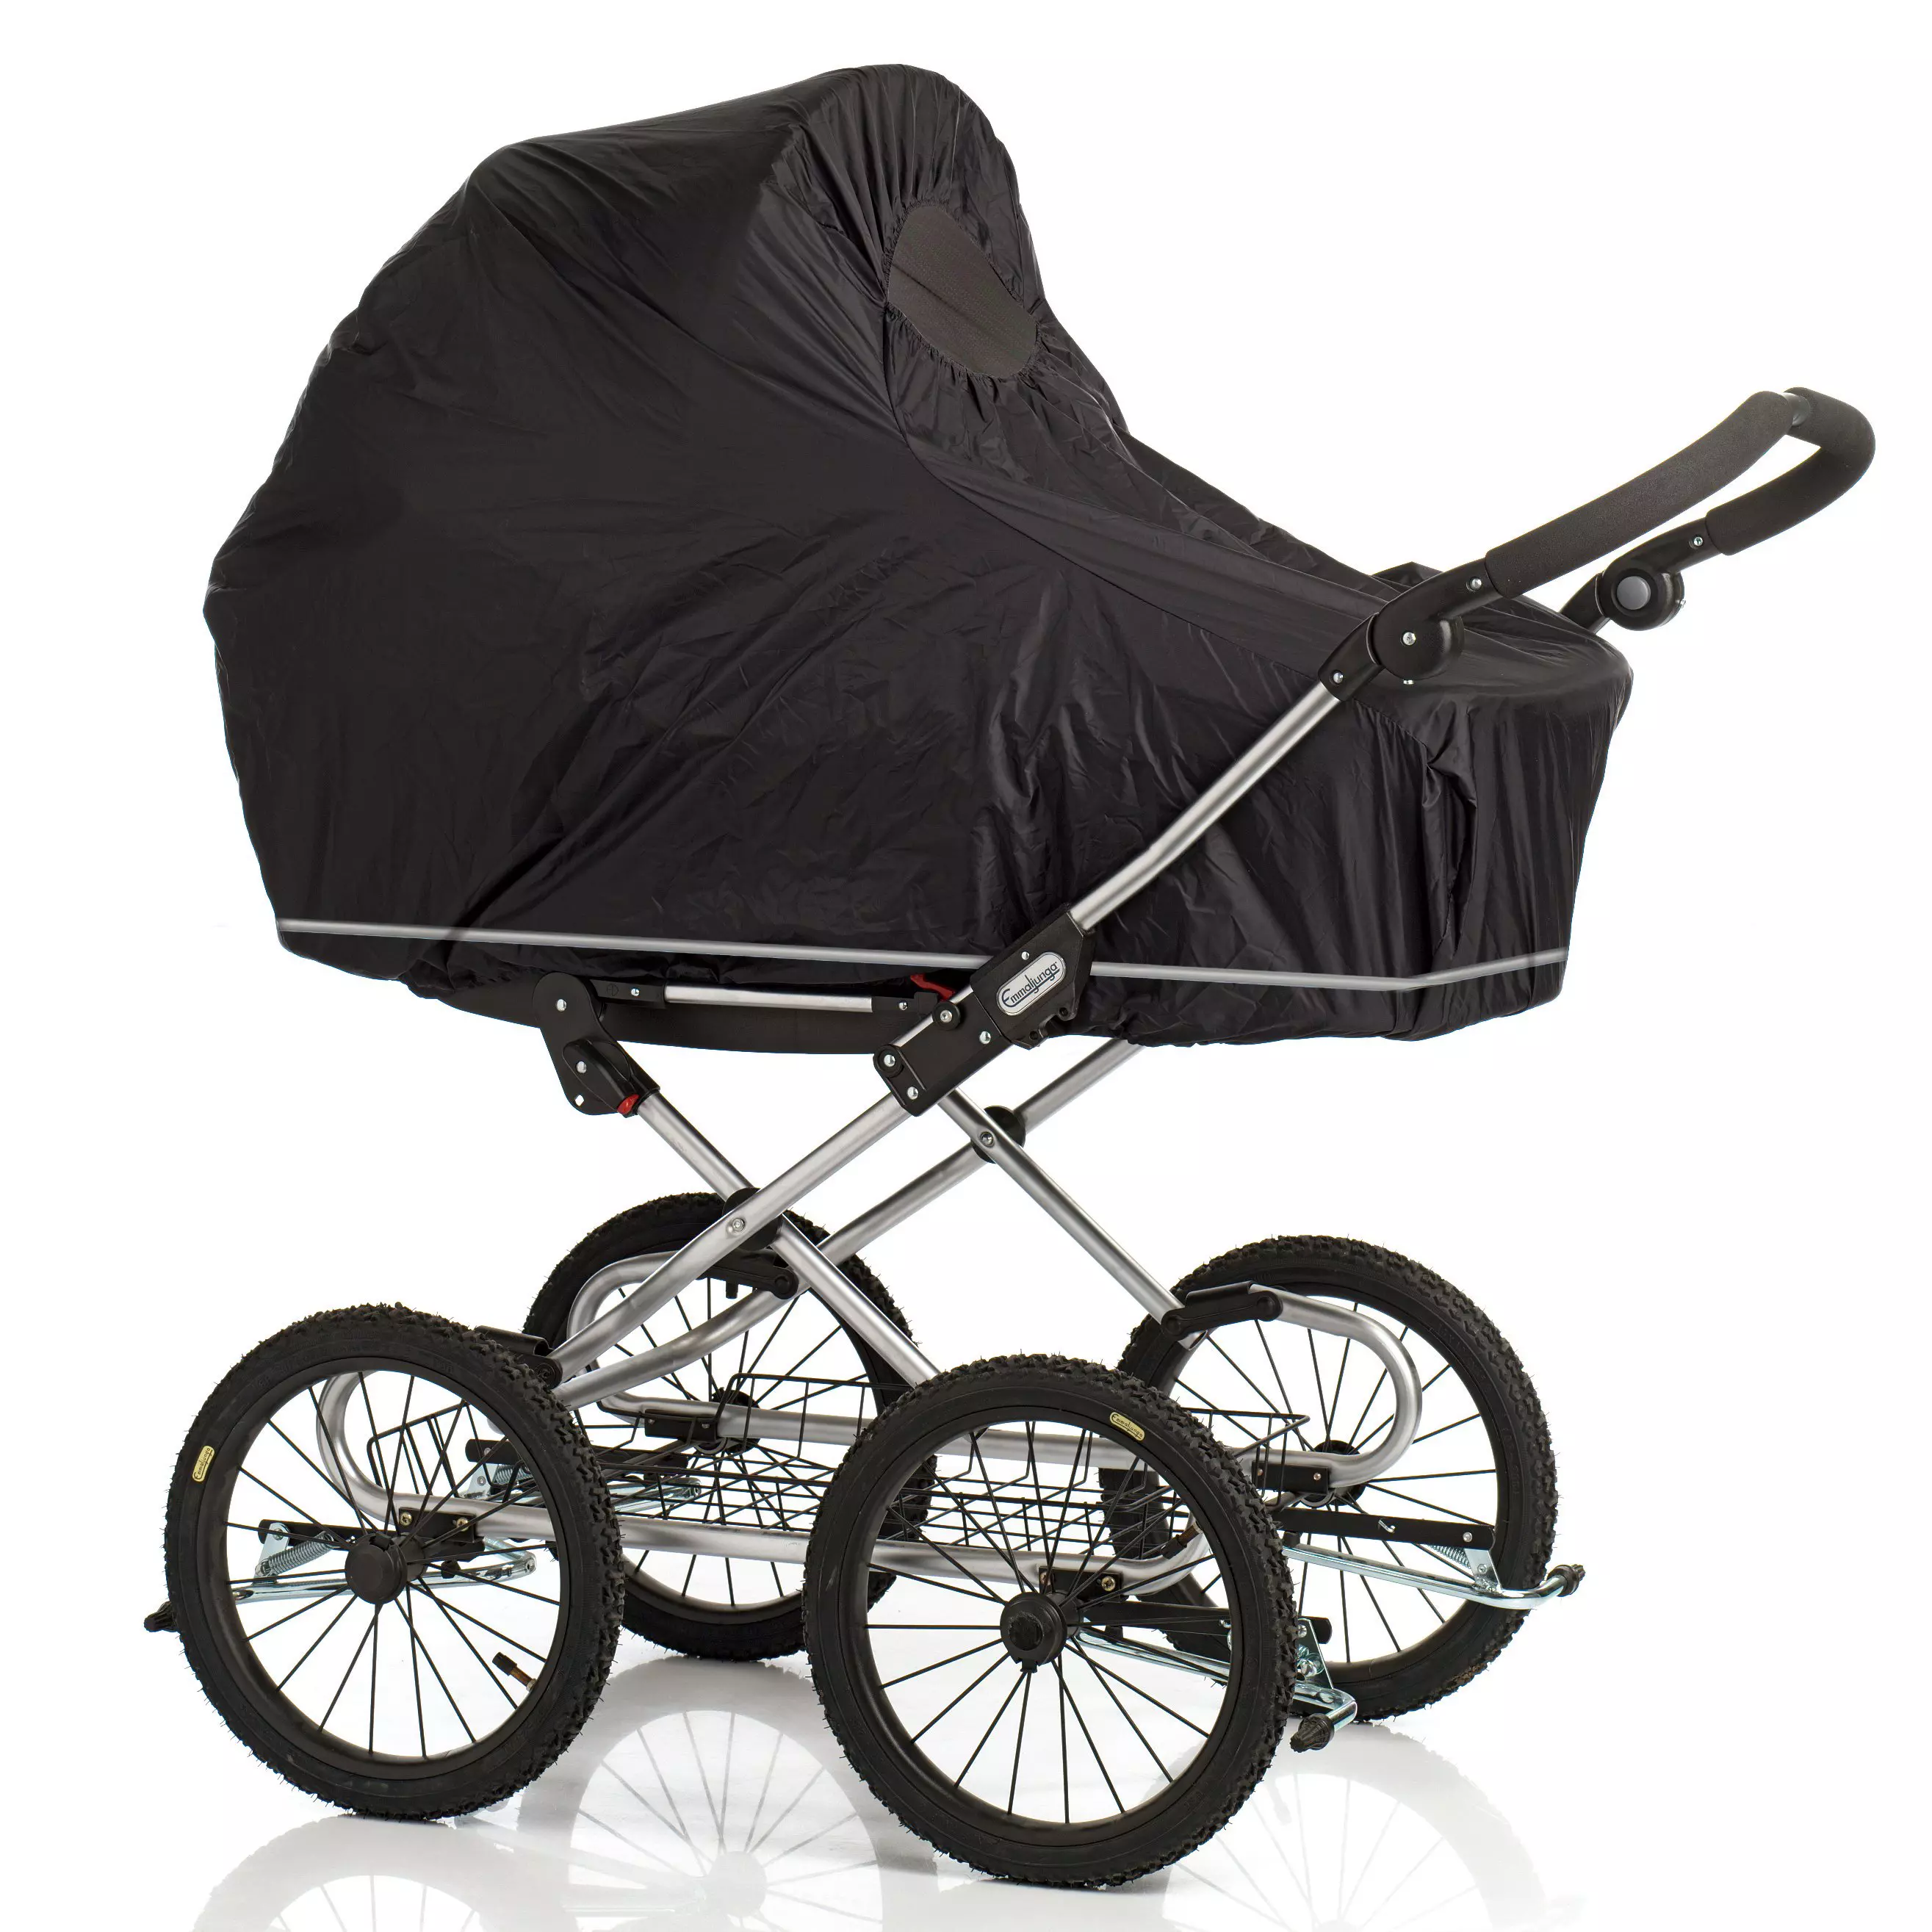 Babydan Raincover With Net And Reflective